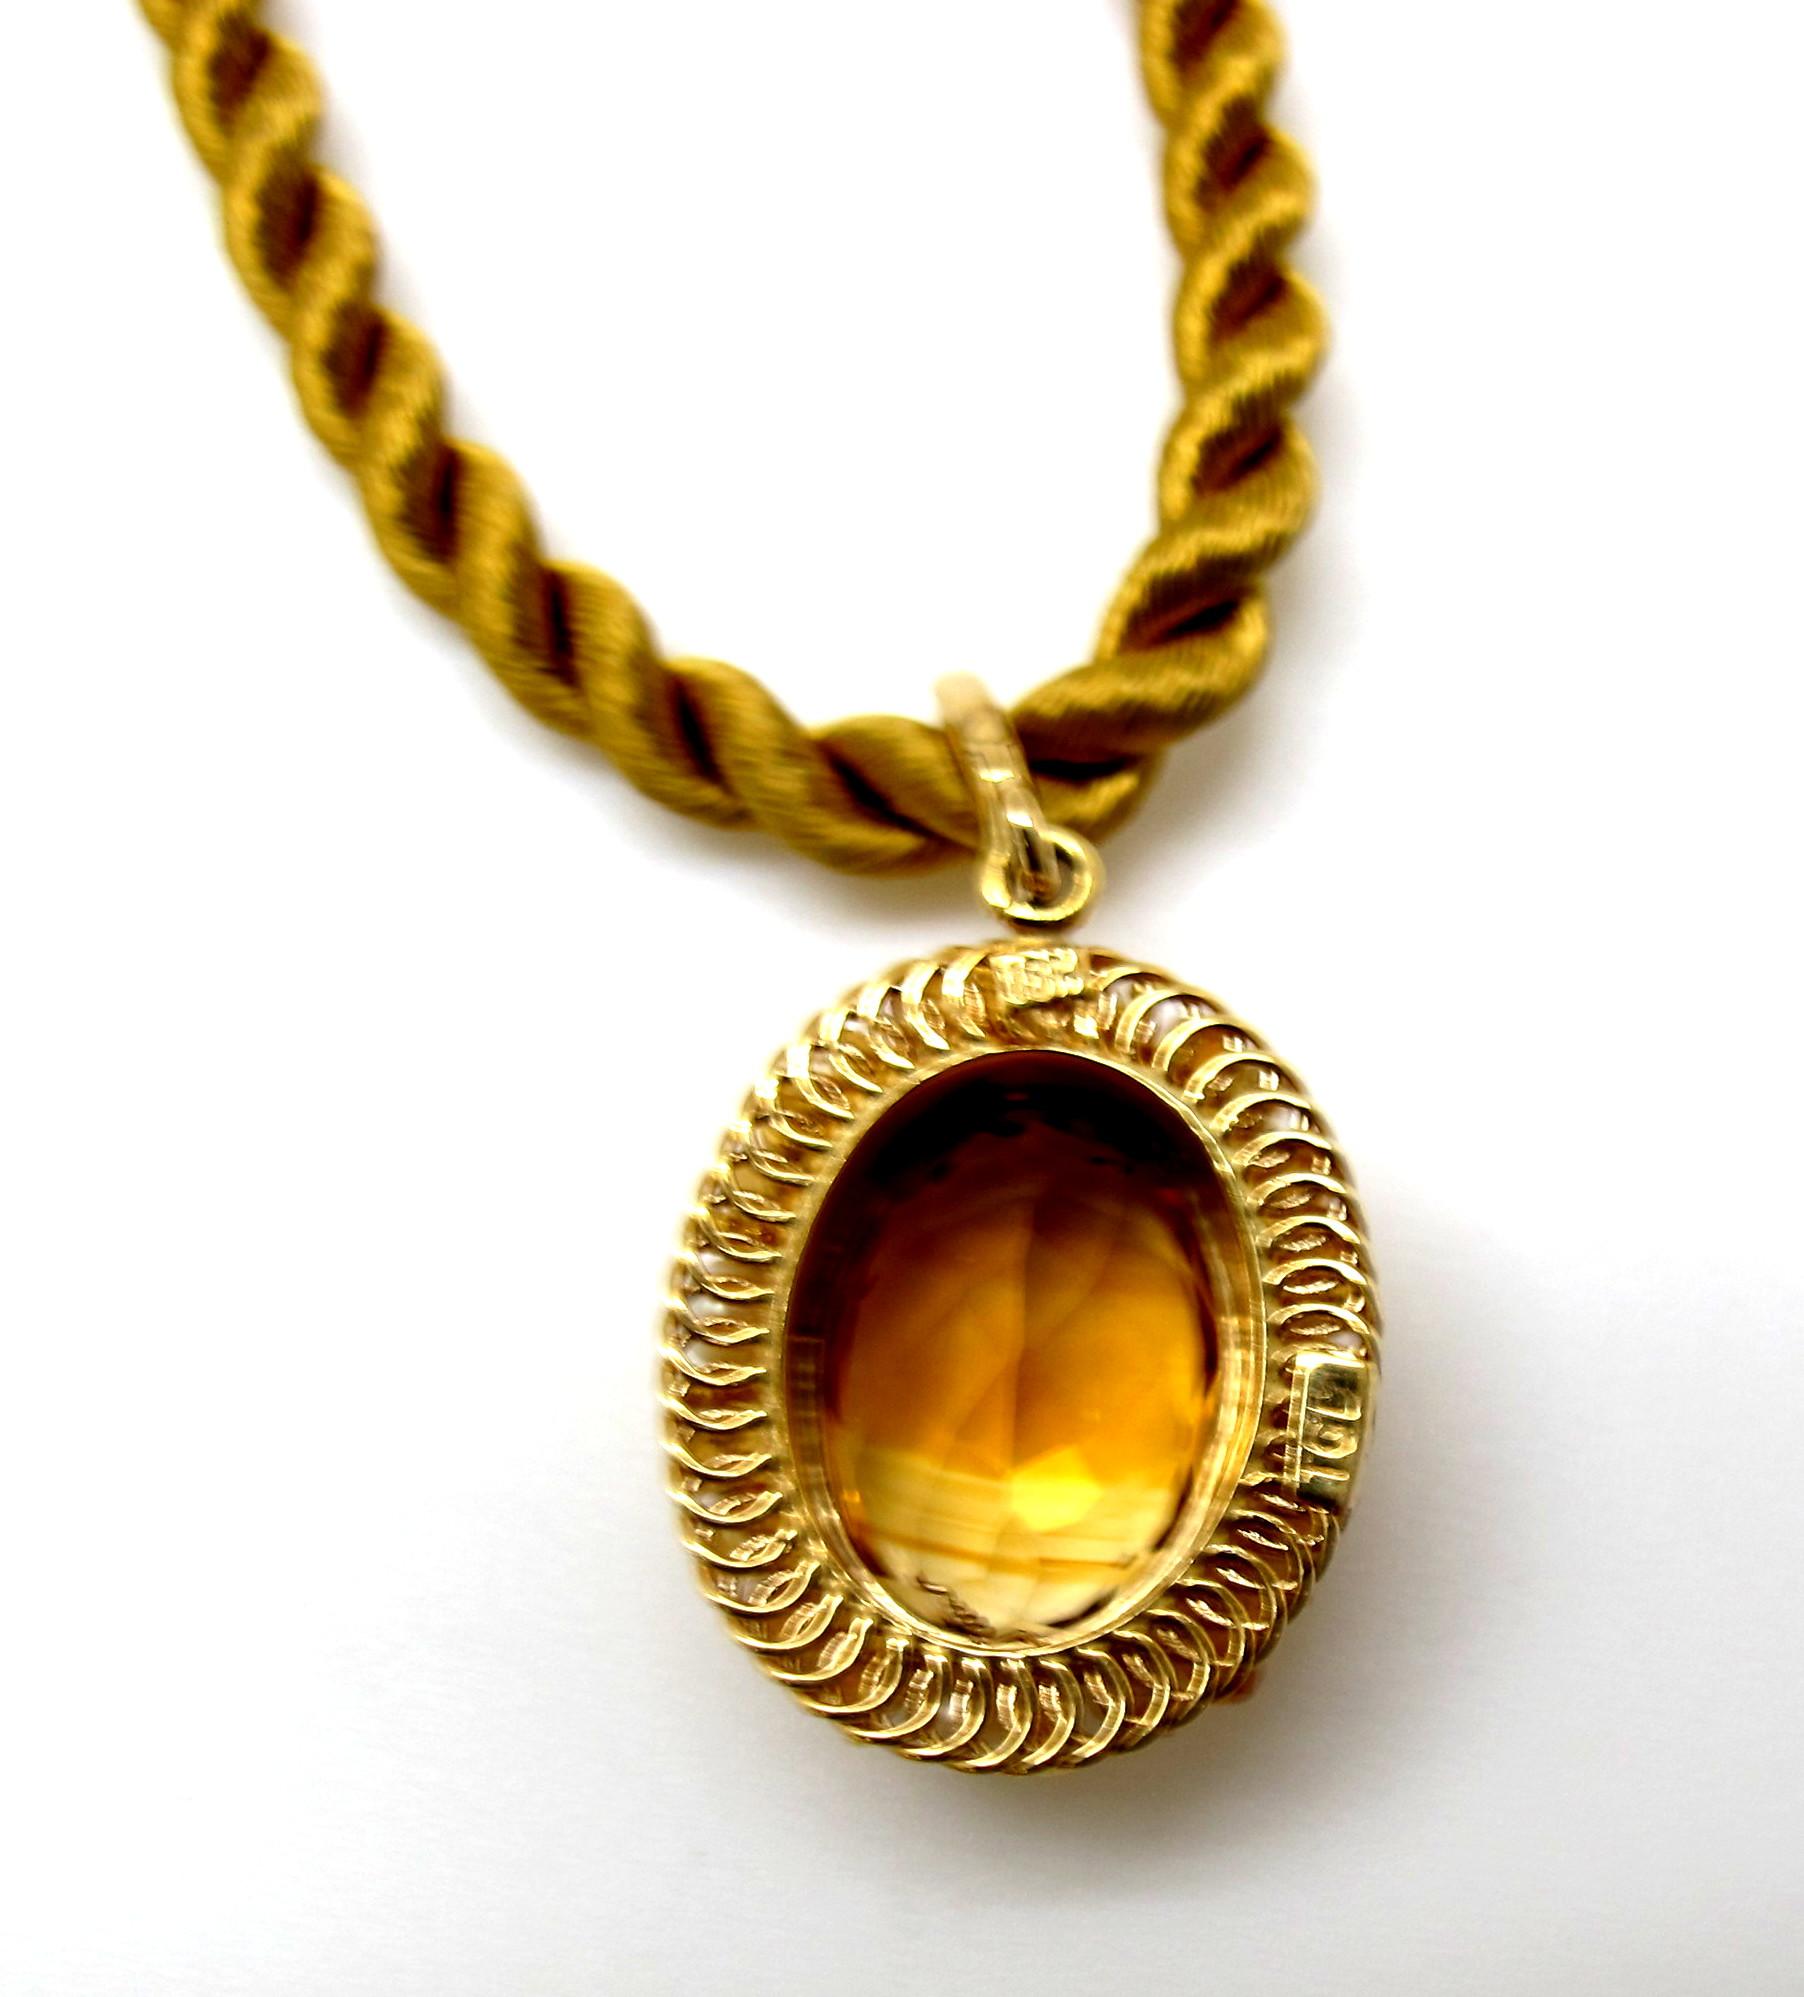 This delicate citrine pendant is entirely handmade of delicate 18 karat yellow gold wire using the lost art of filigree. It was made by one of our Master Jewelers in Los Angeles who has retired after a lifetime of devotion to his intricate art. The